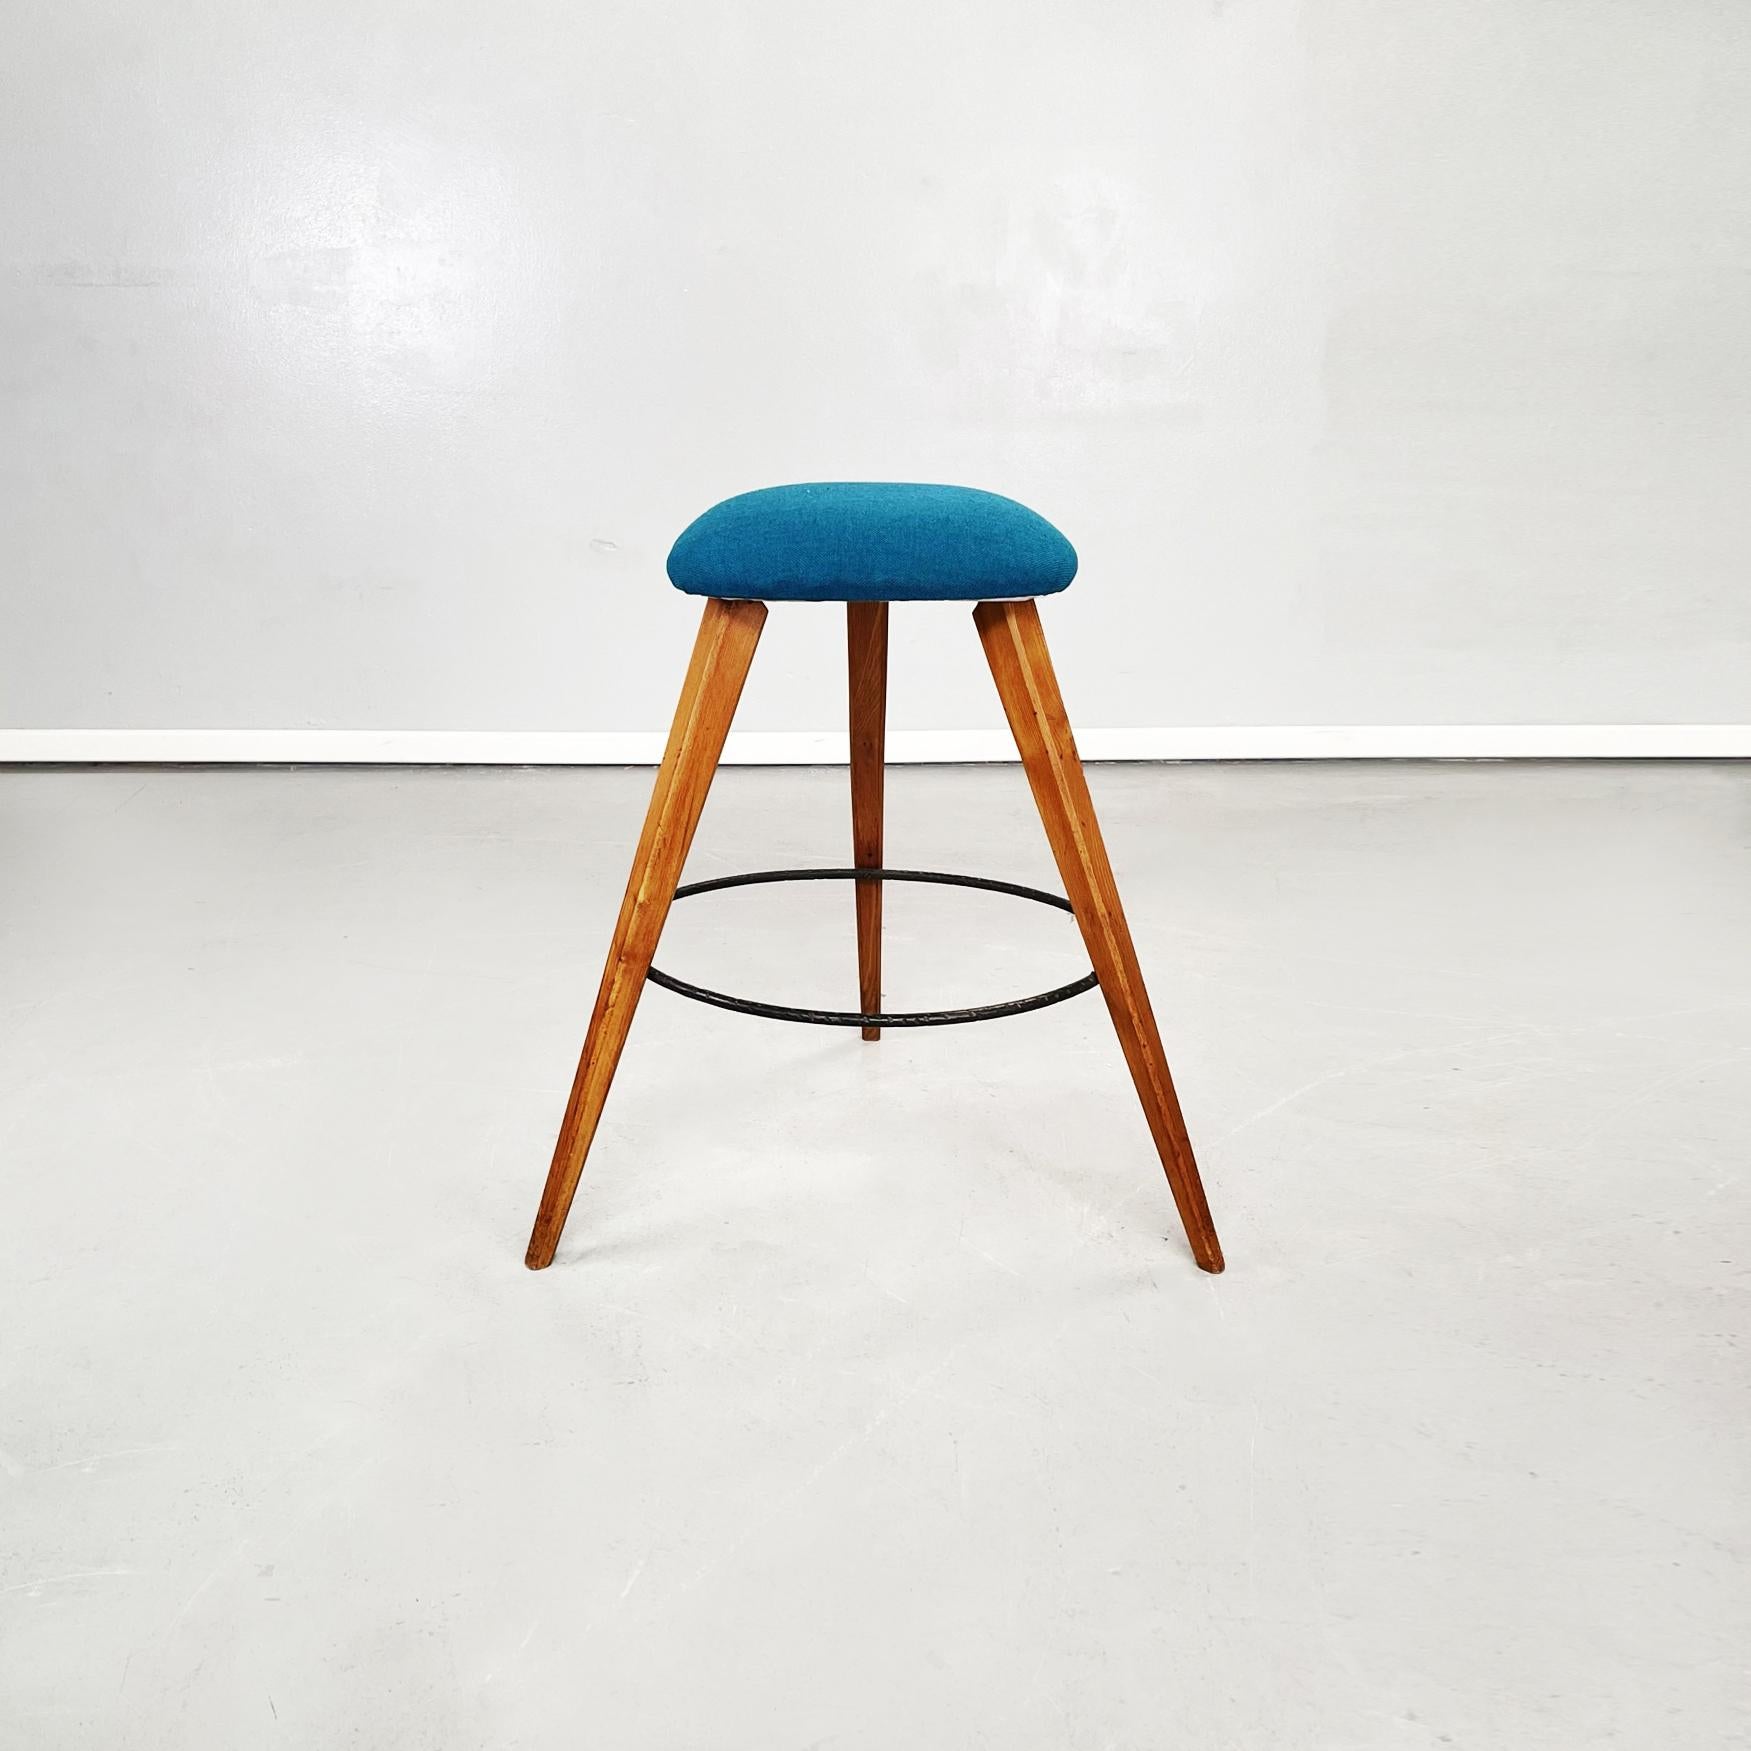 Italian Mid-Century Modern stools in wood, black iron and blue fabric, 1960s.
Pair of high stools with padded seat covered in turquoise blue fabric. The three legs are made of wood and connected by a black iron circle.

1960s.

Very good